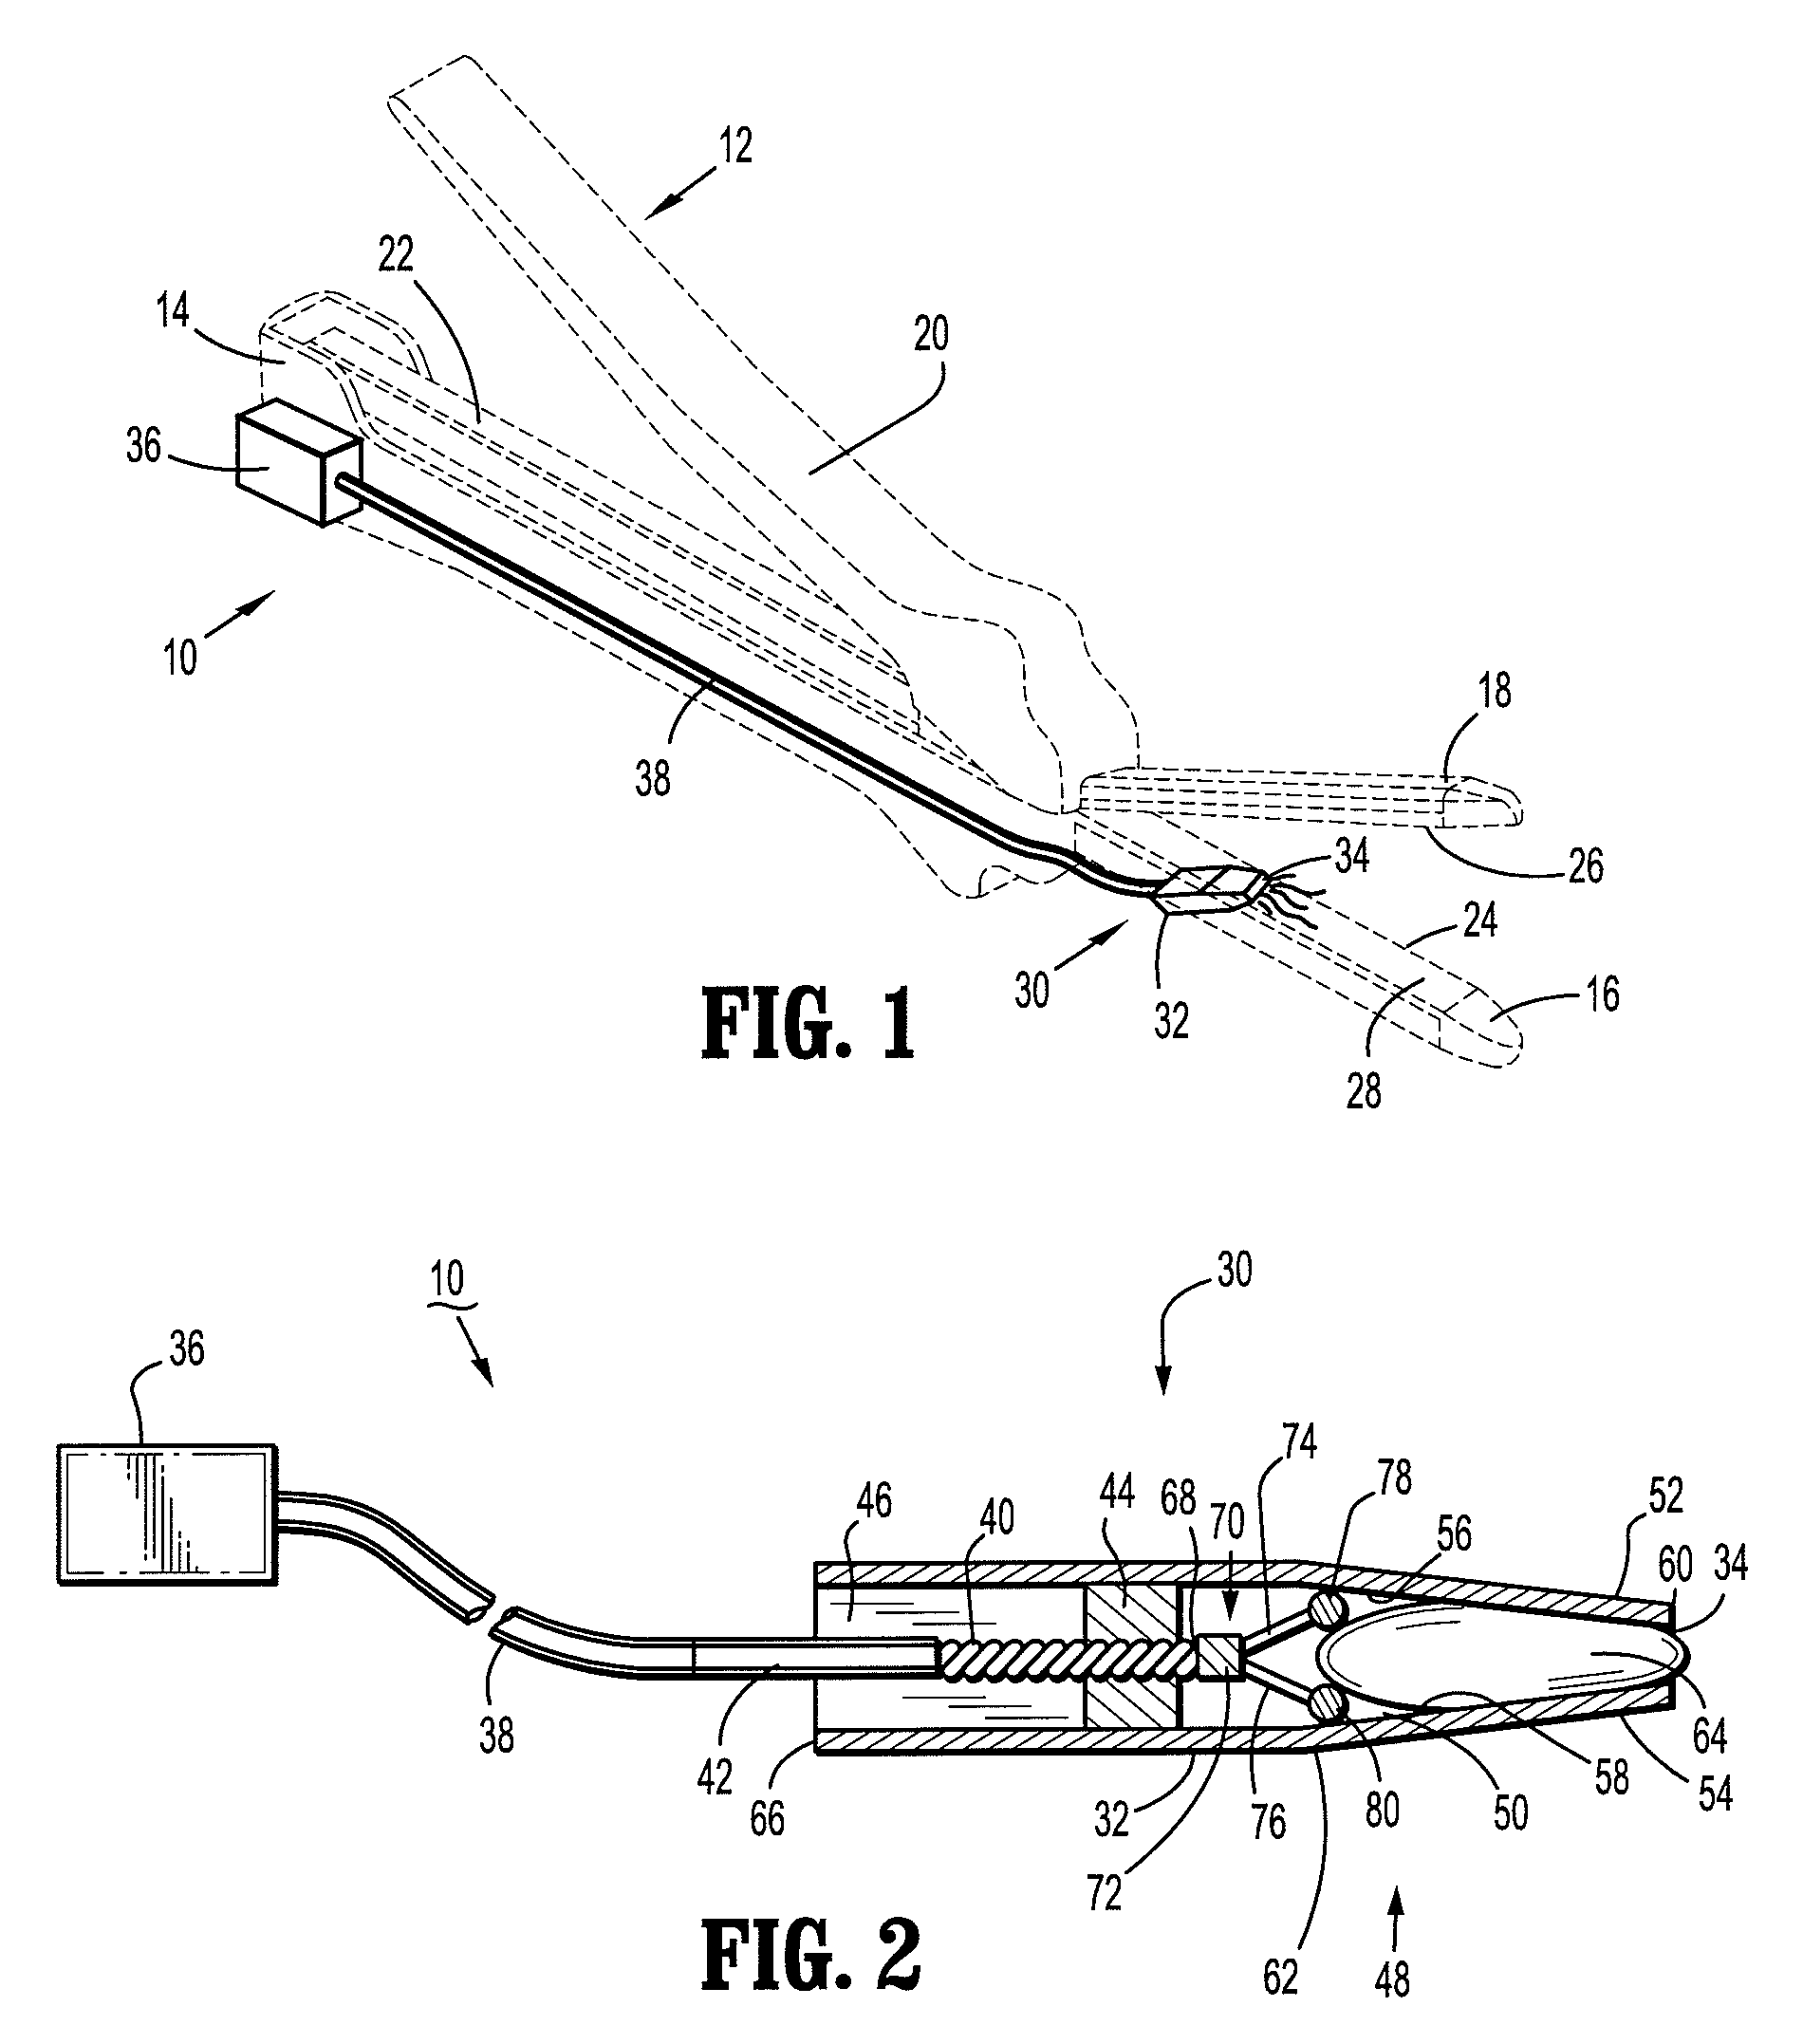 Stapler powered auxiliary device for injecting material between stapler jaws